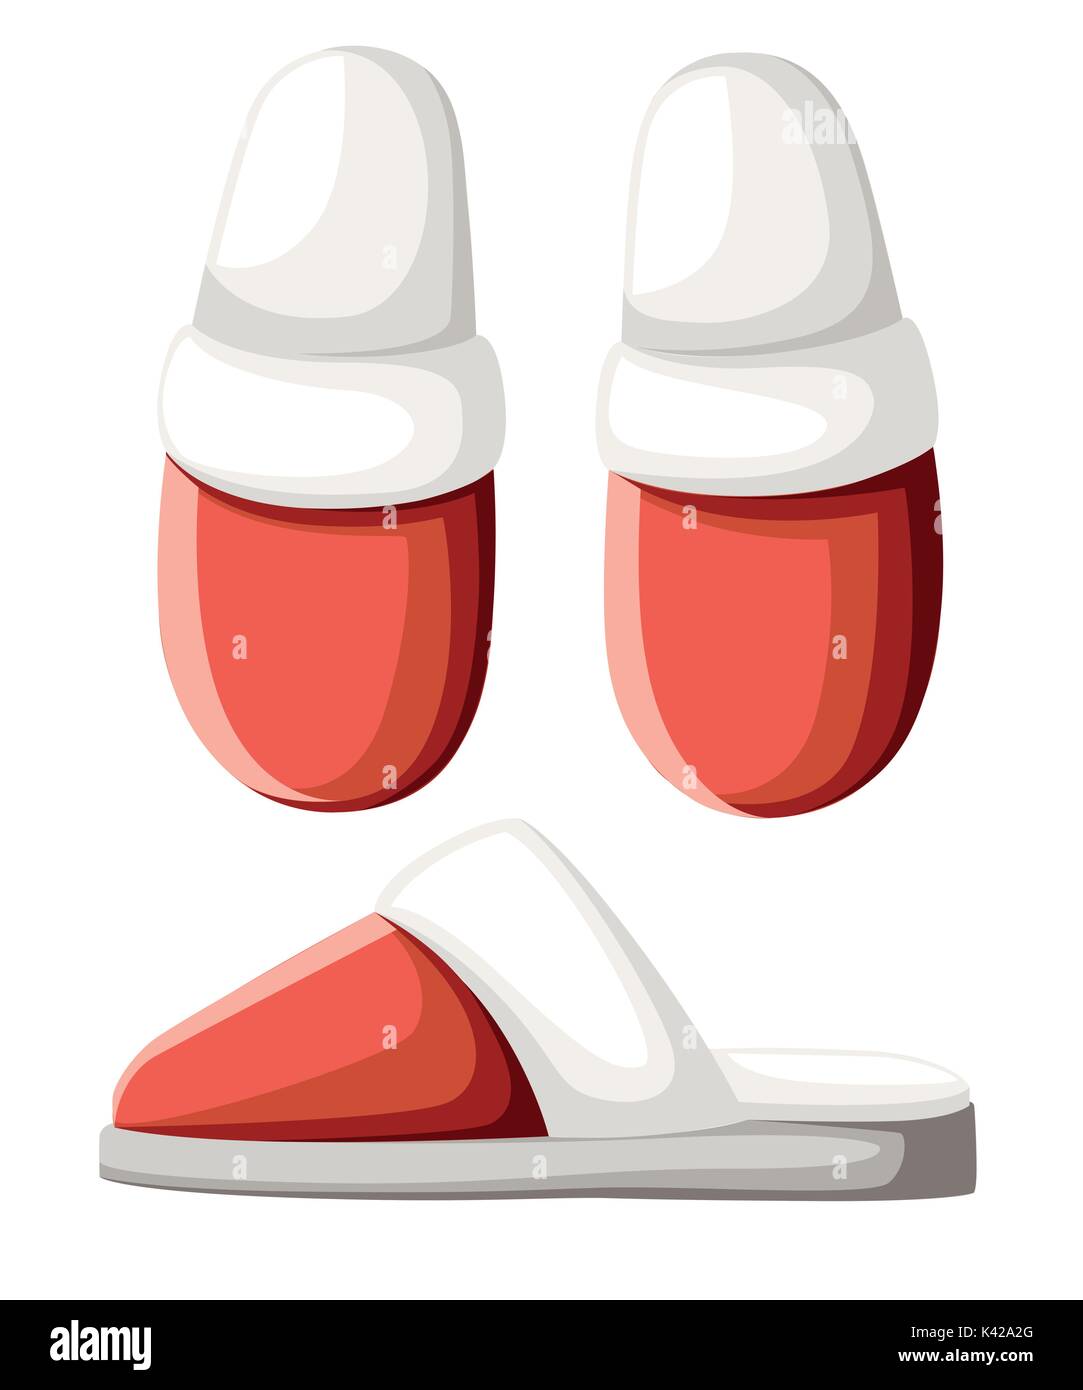 Home slippers in cartoon style. Illustration of home slippers icon vector isolated on white background Stock Vector Image - Alamy